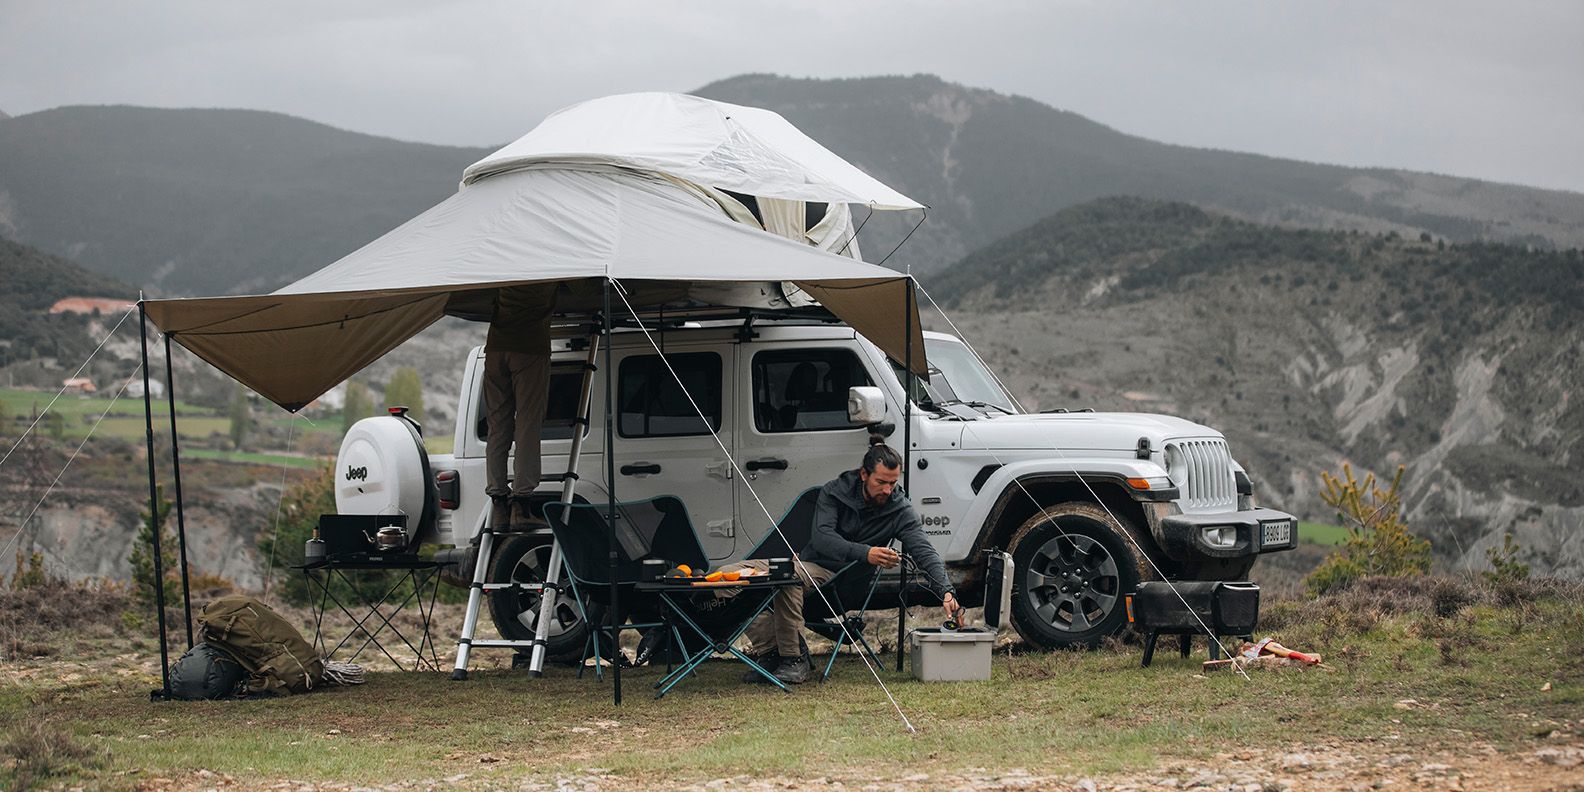 In the mountains a jeep is parked with a Thule Approch rooftop tent and a man sits under the awning